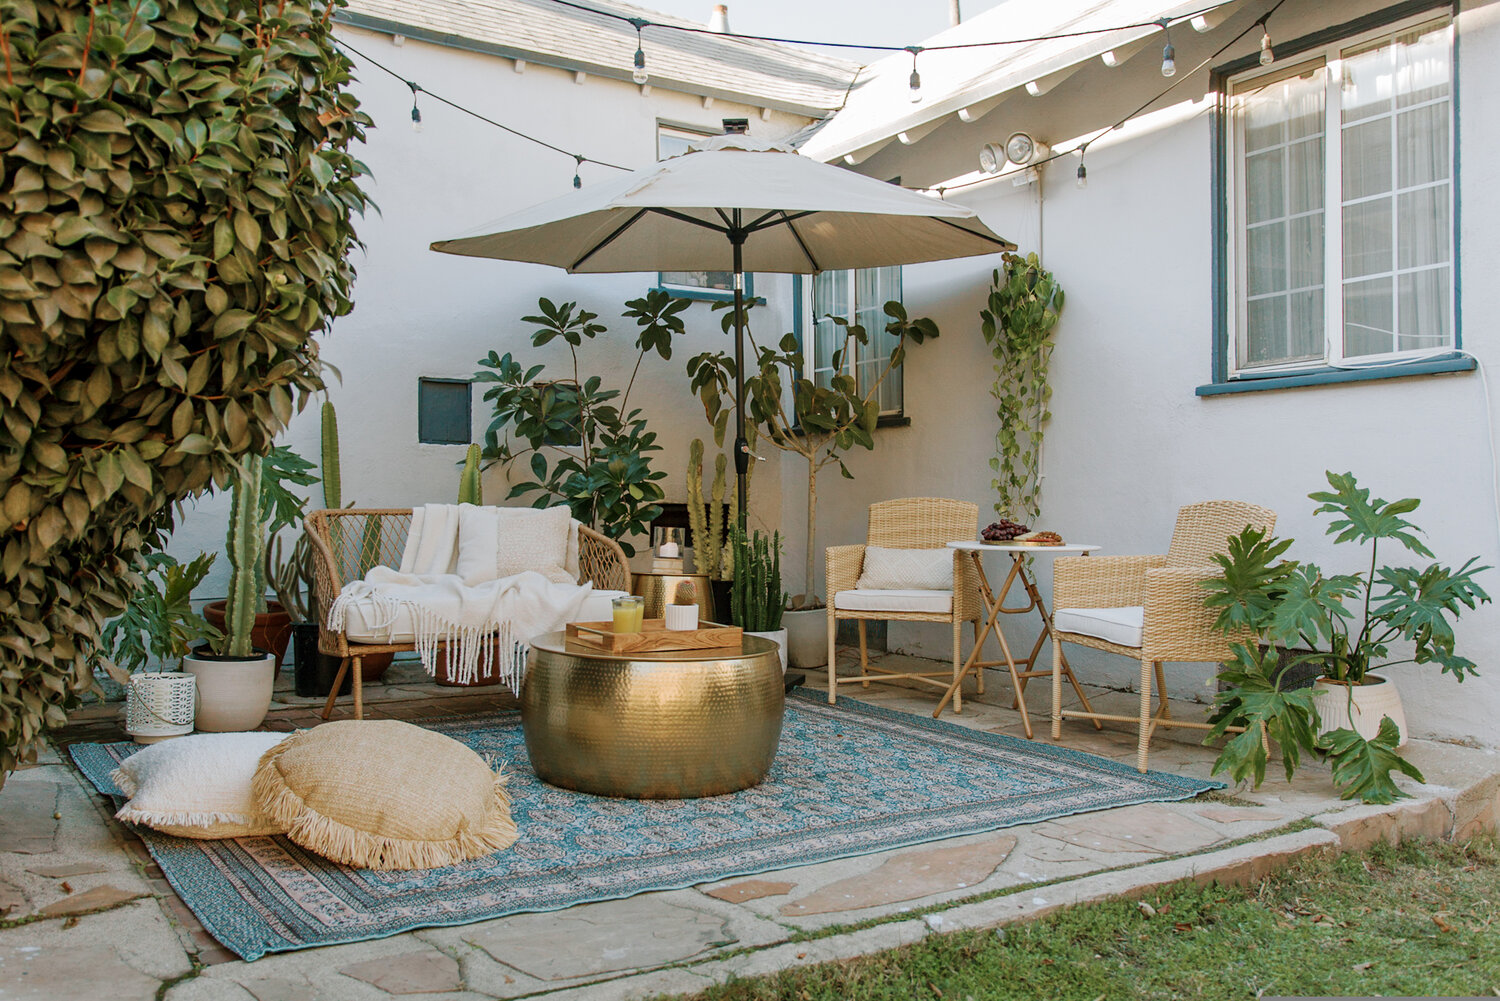 Simple patio layout with bright outdoor rug